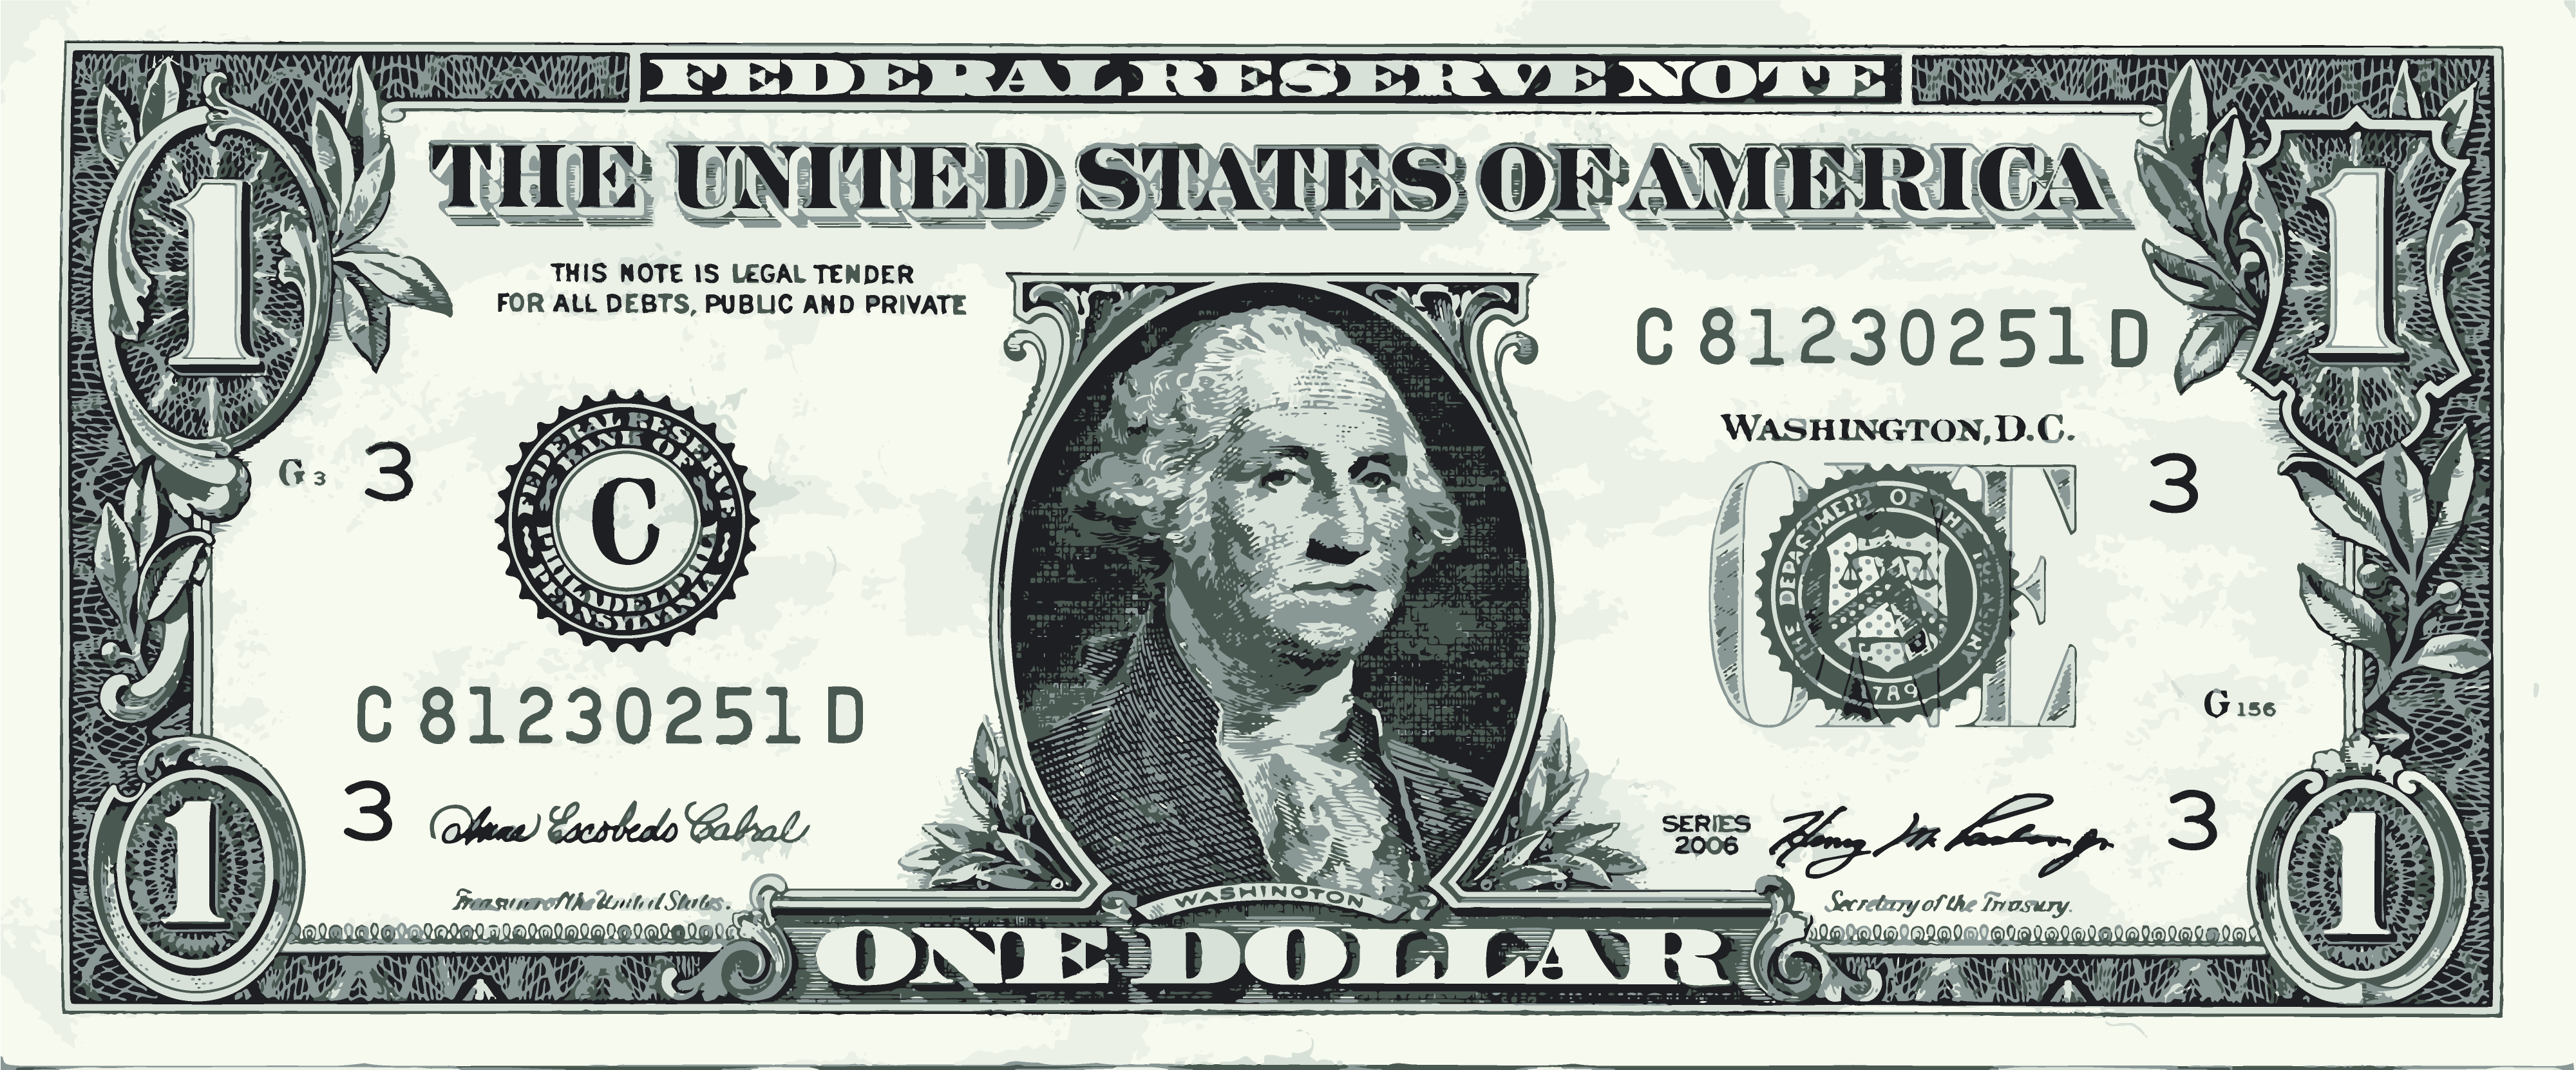 One Dollar Bill PNG Transparent One Dollar Bill.PNG Images. PlusPNG